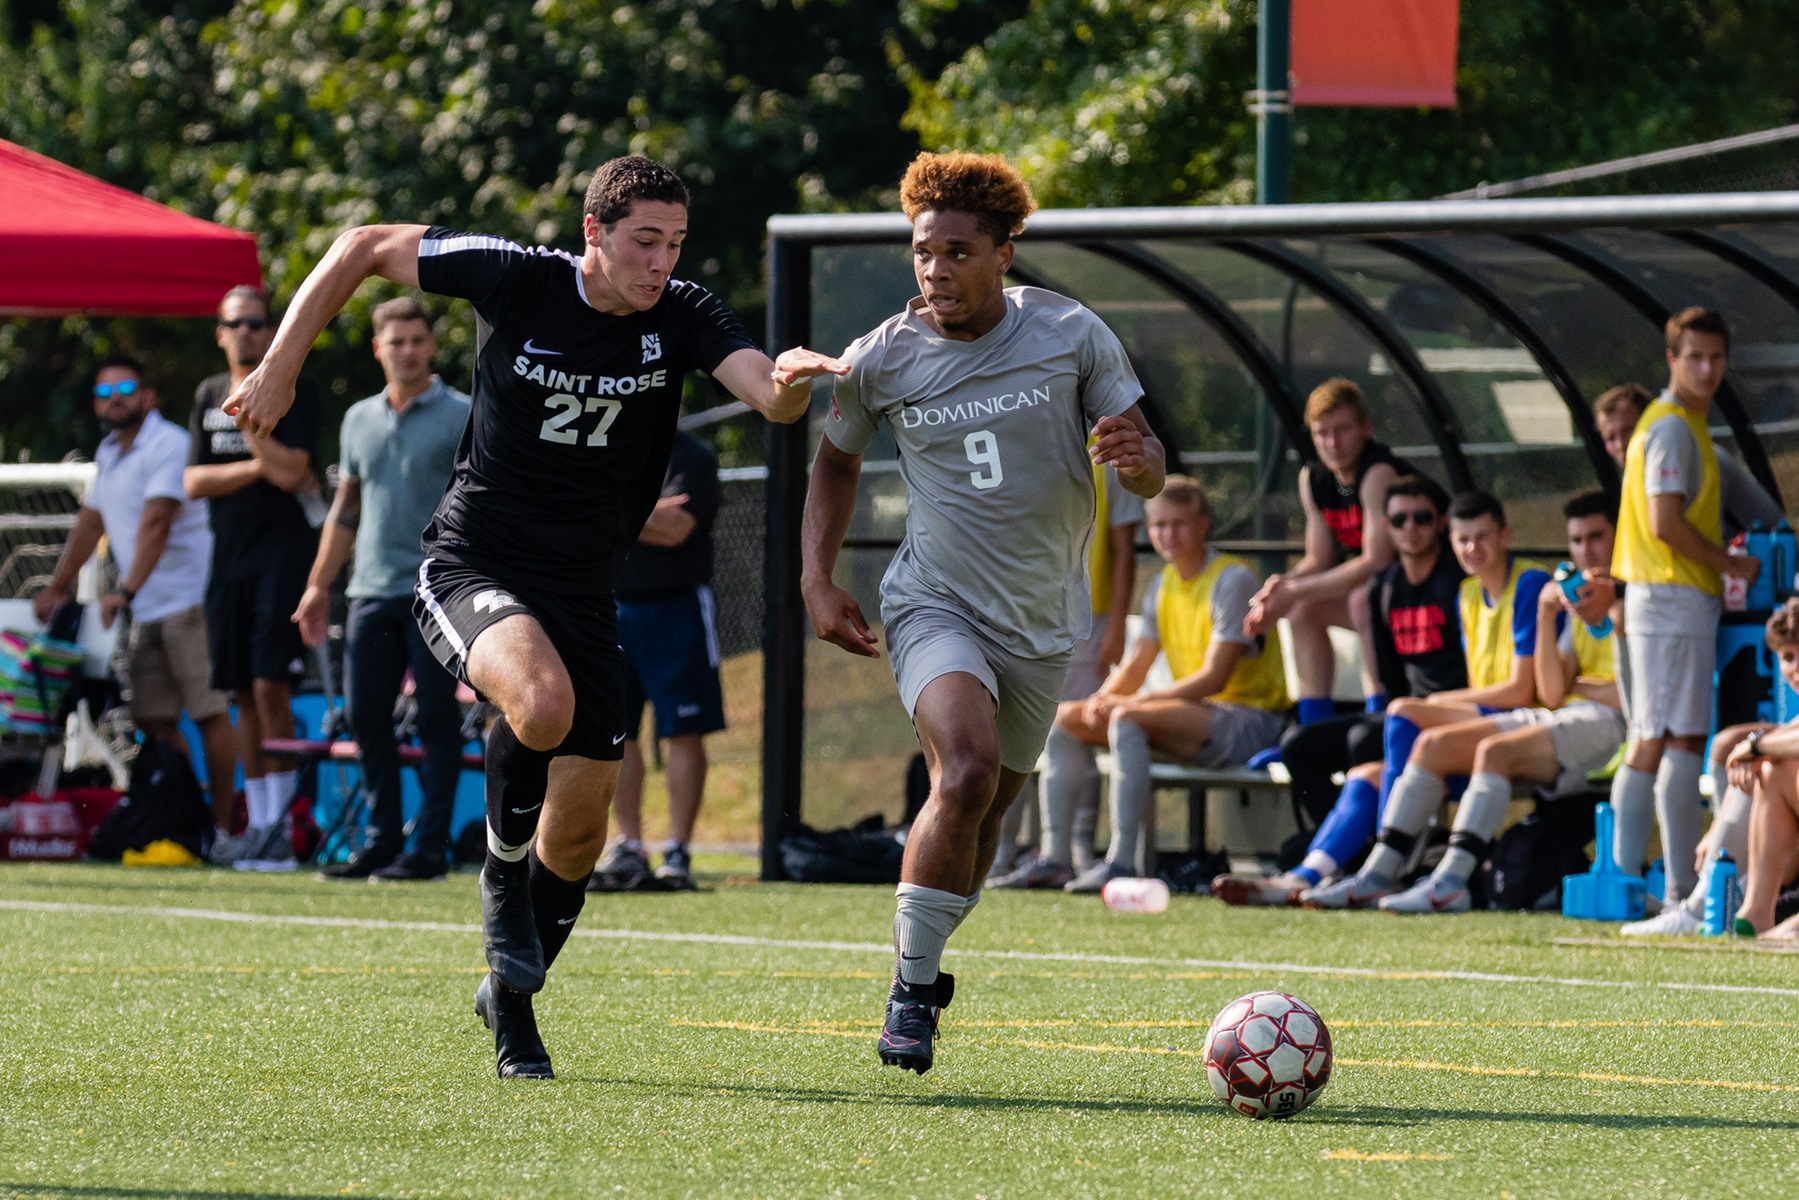 Jean Paul Lyons netted two goals to help lead the men's soccer team past Caldwell University.